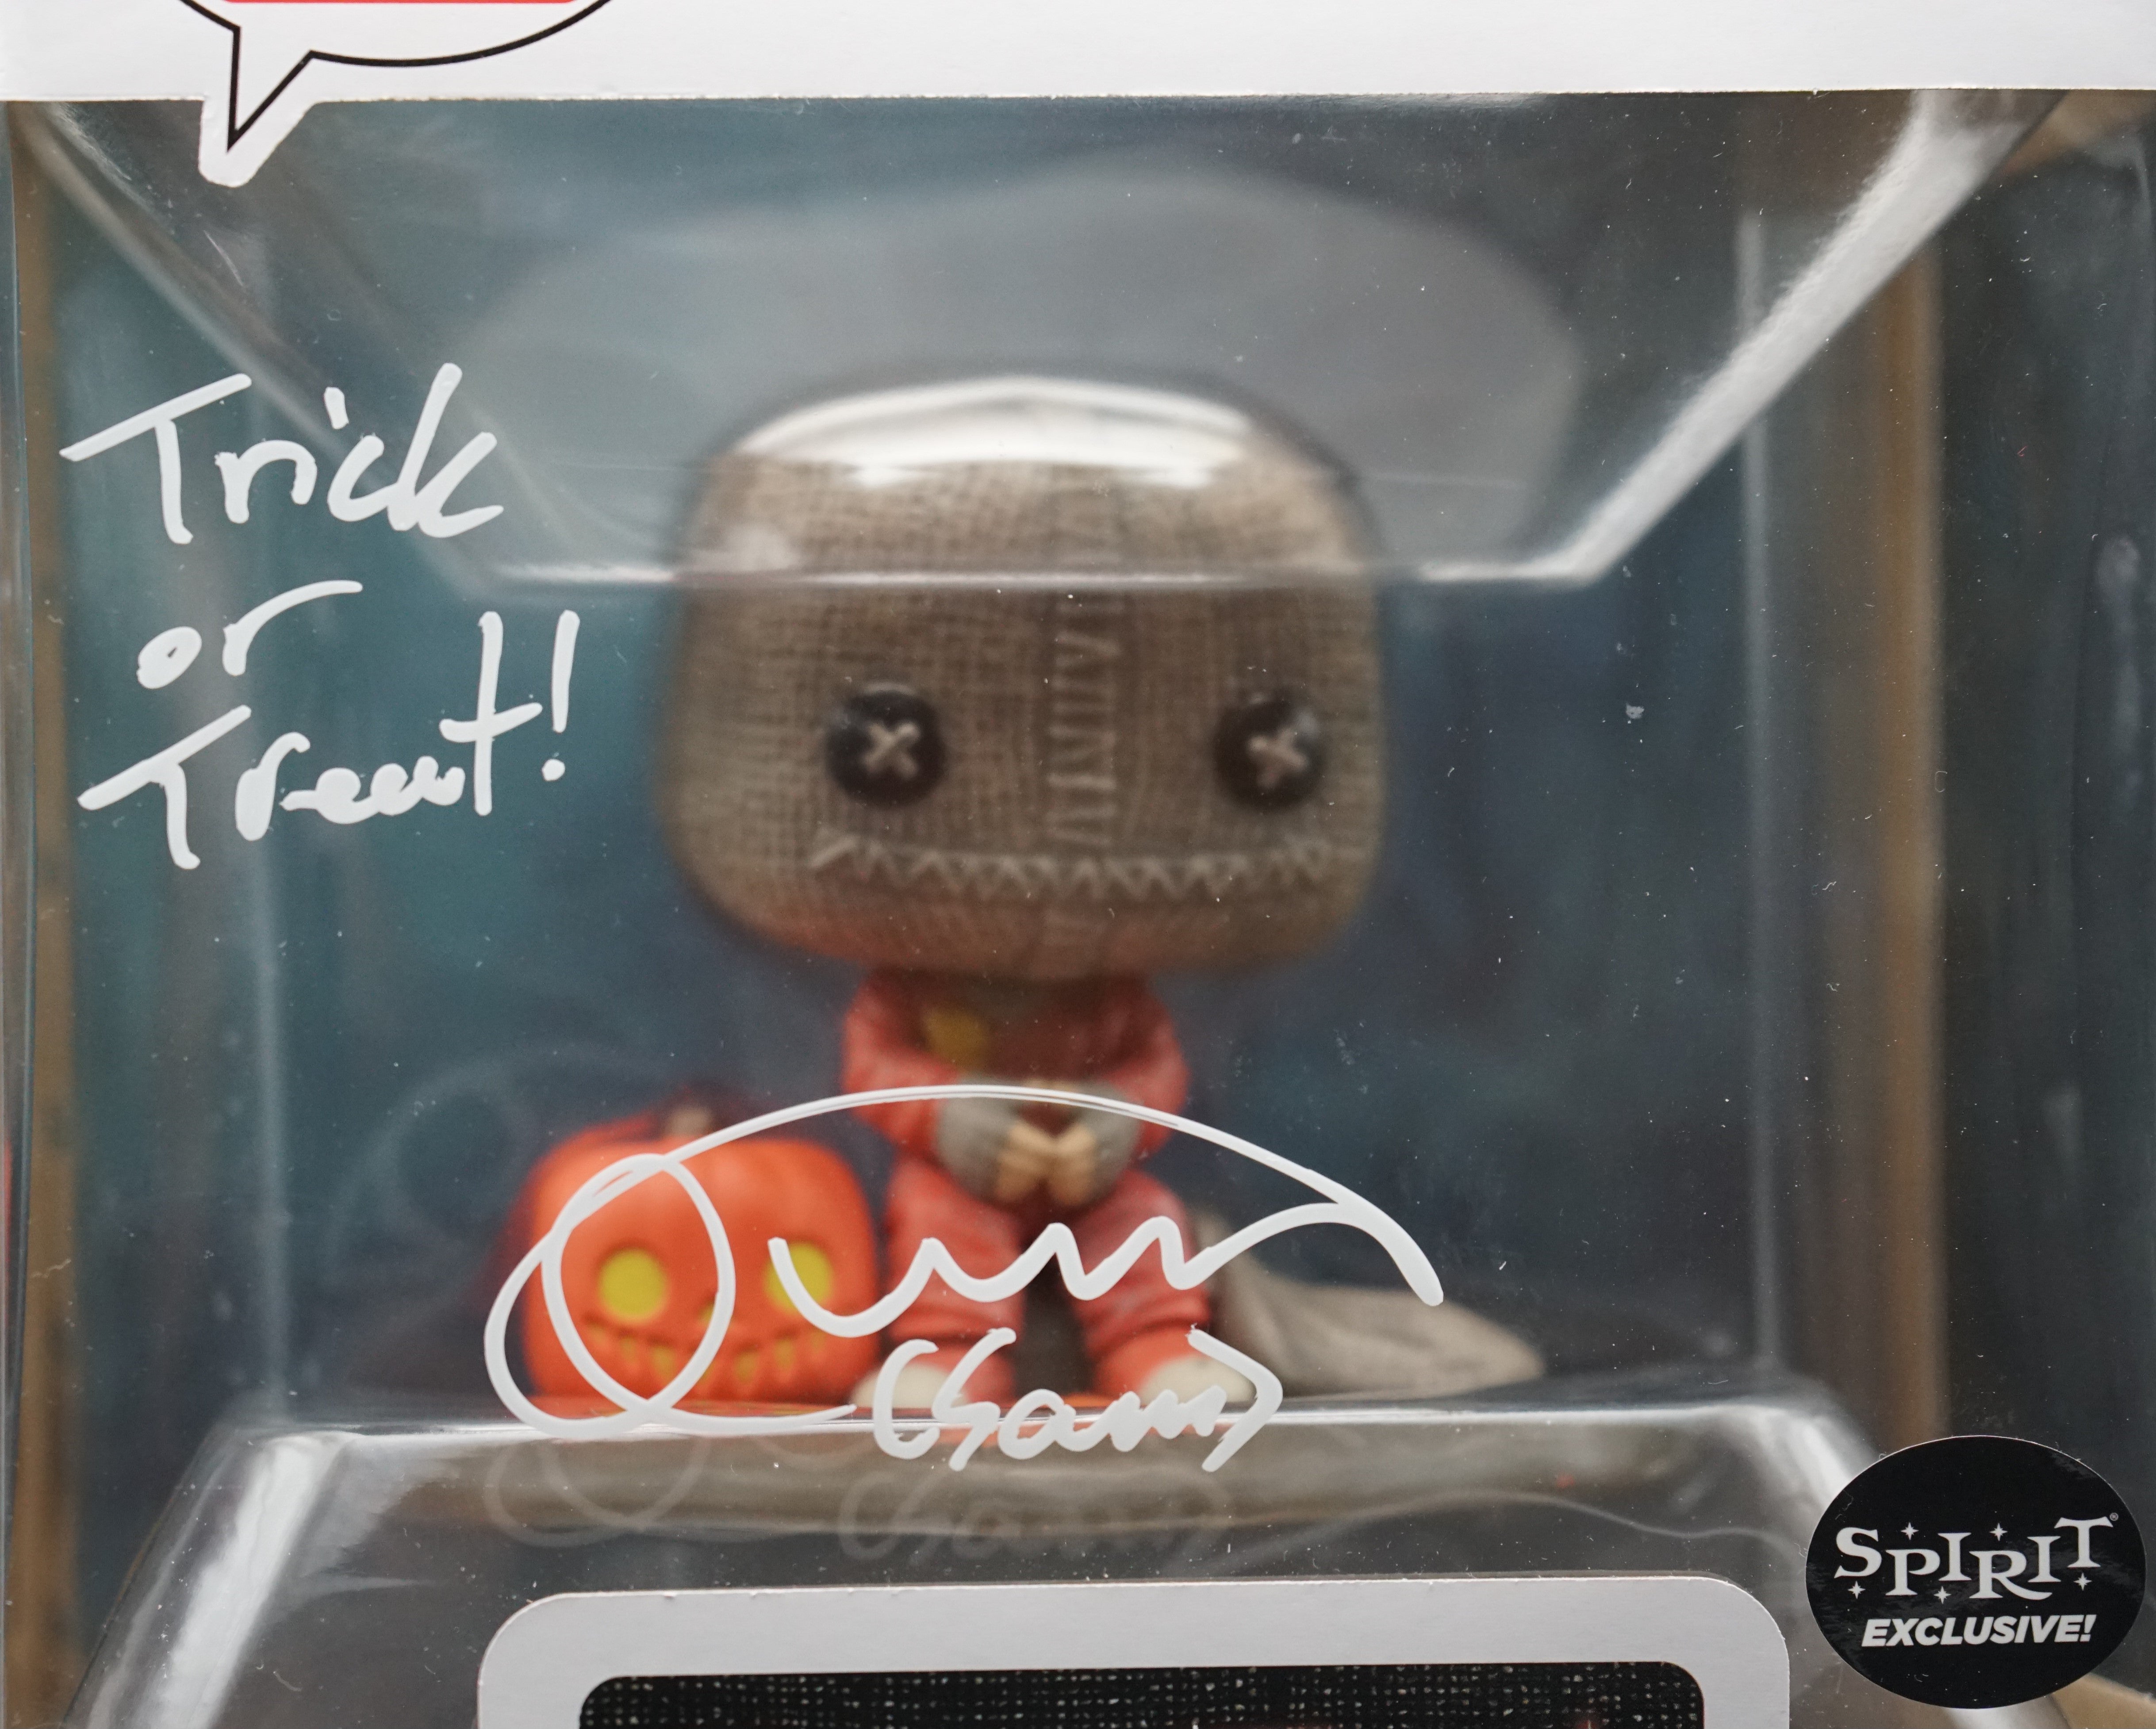 Sam Deluxe Funko Pop #1002 Signed by Quinn Lord with Inscription "Trick or Treat" PSA COA